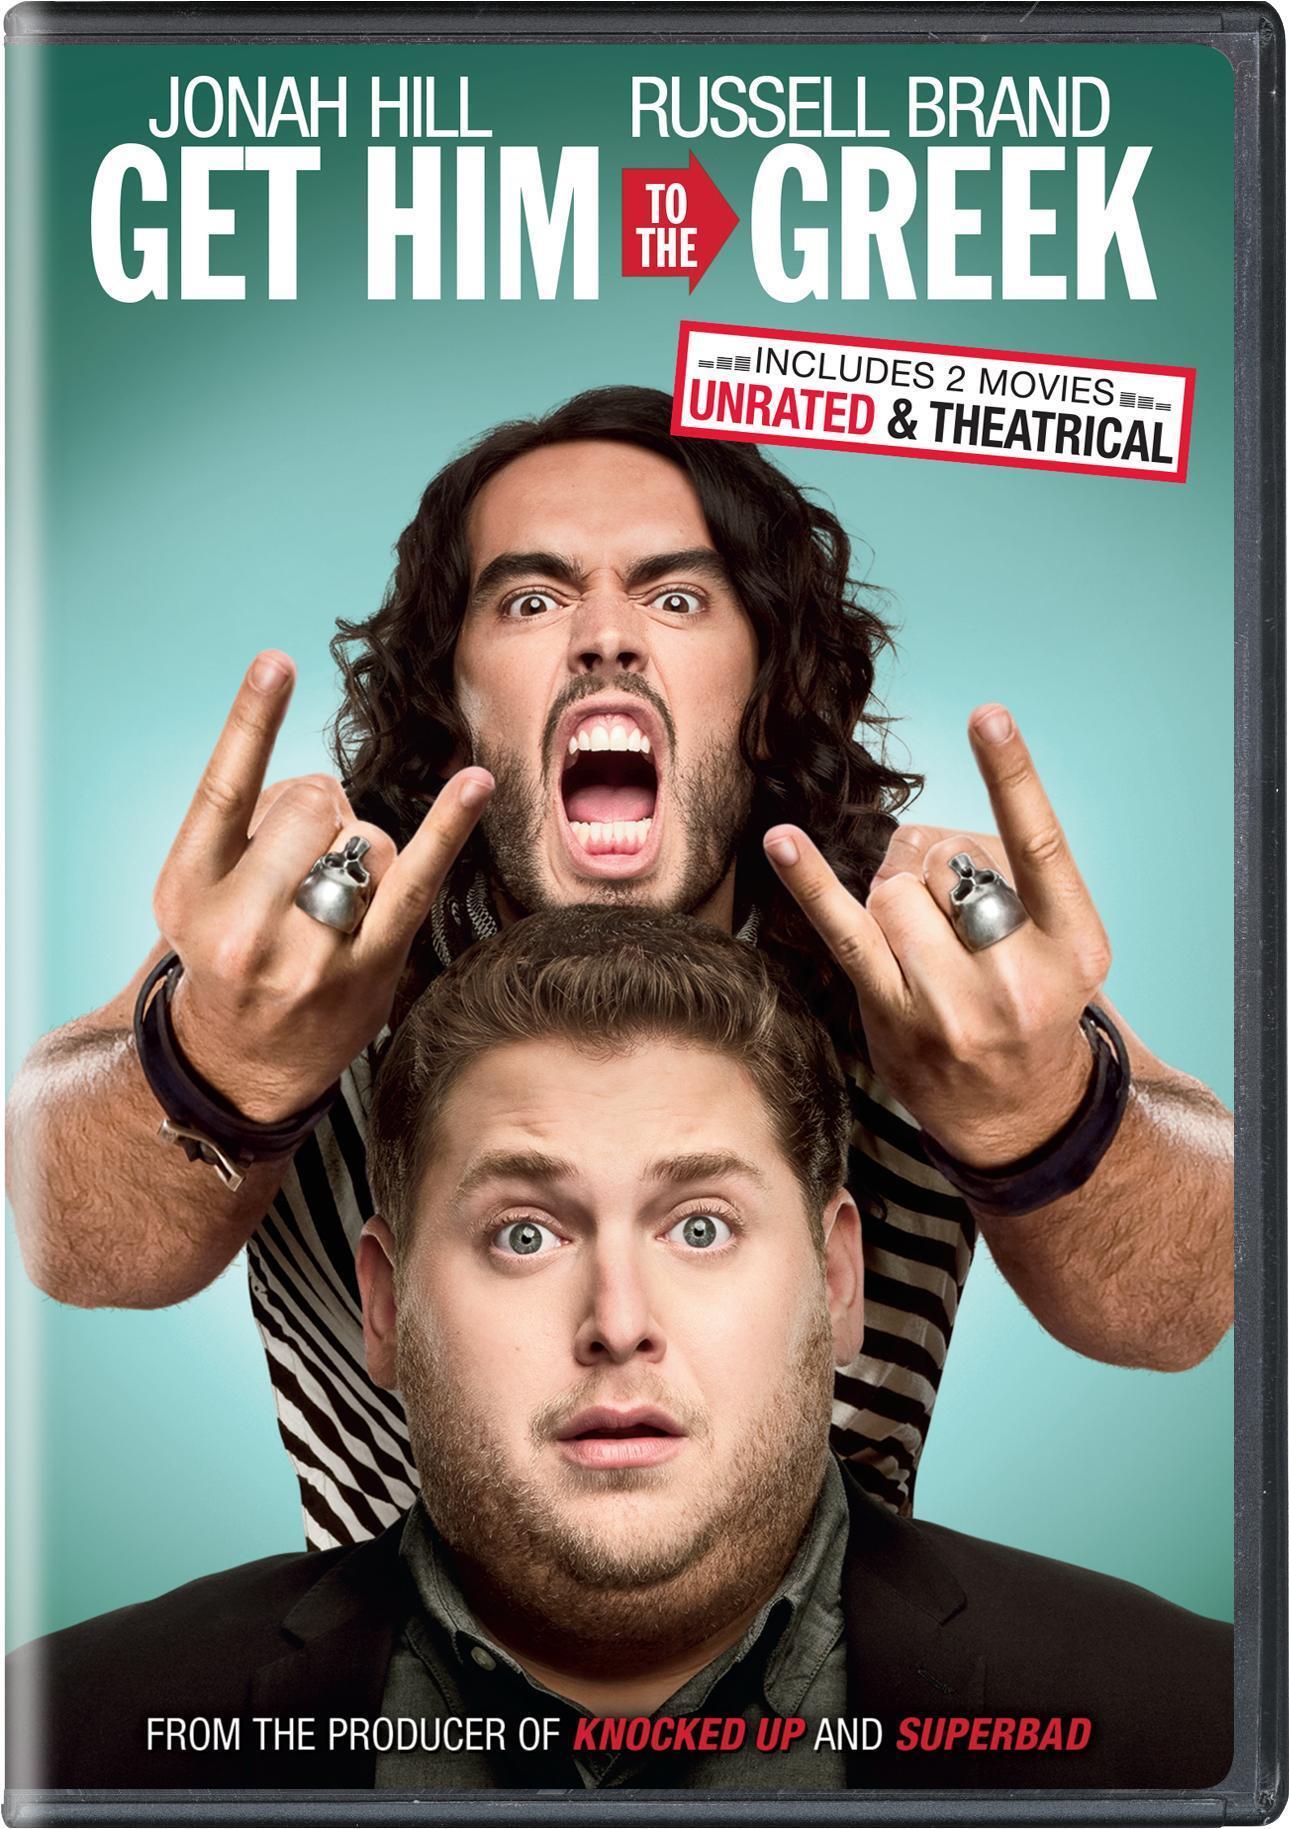 Get Him To The Greek - DVD [ 2010 ]  - Comedy Movies On DVD - Movies On GRUV